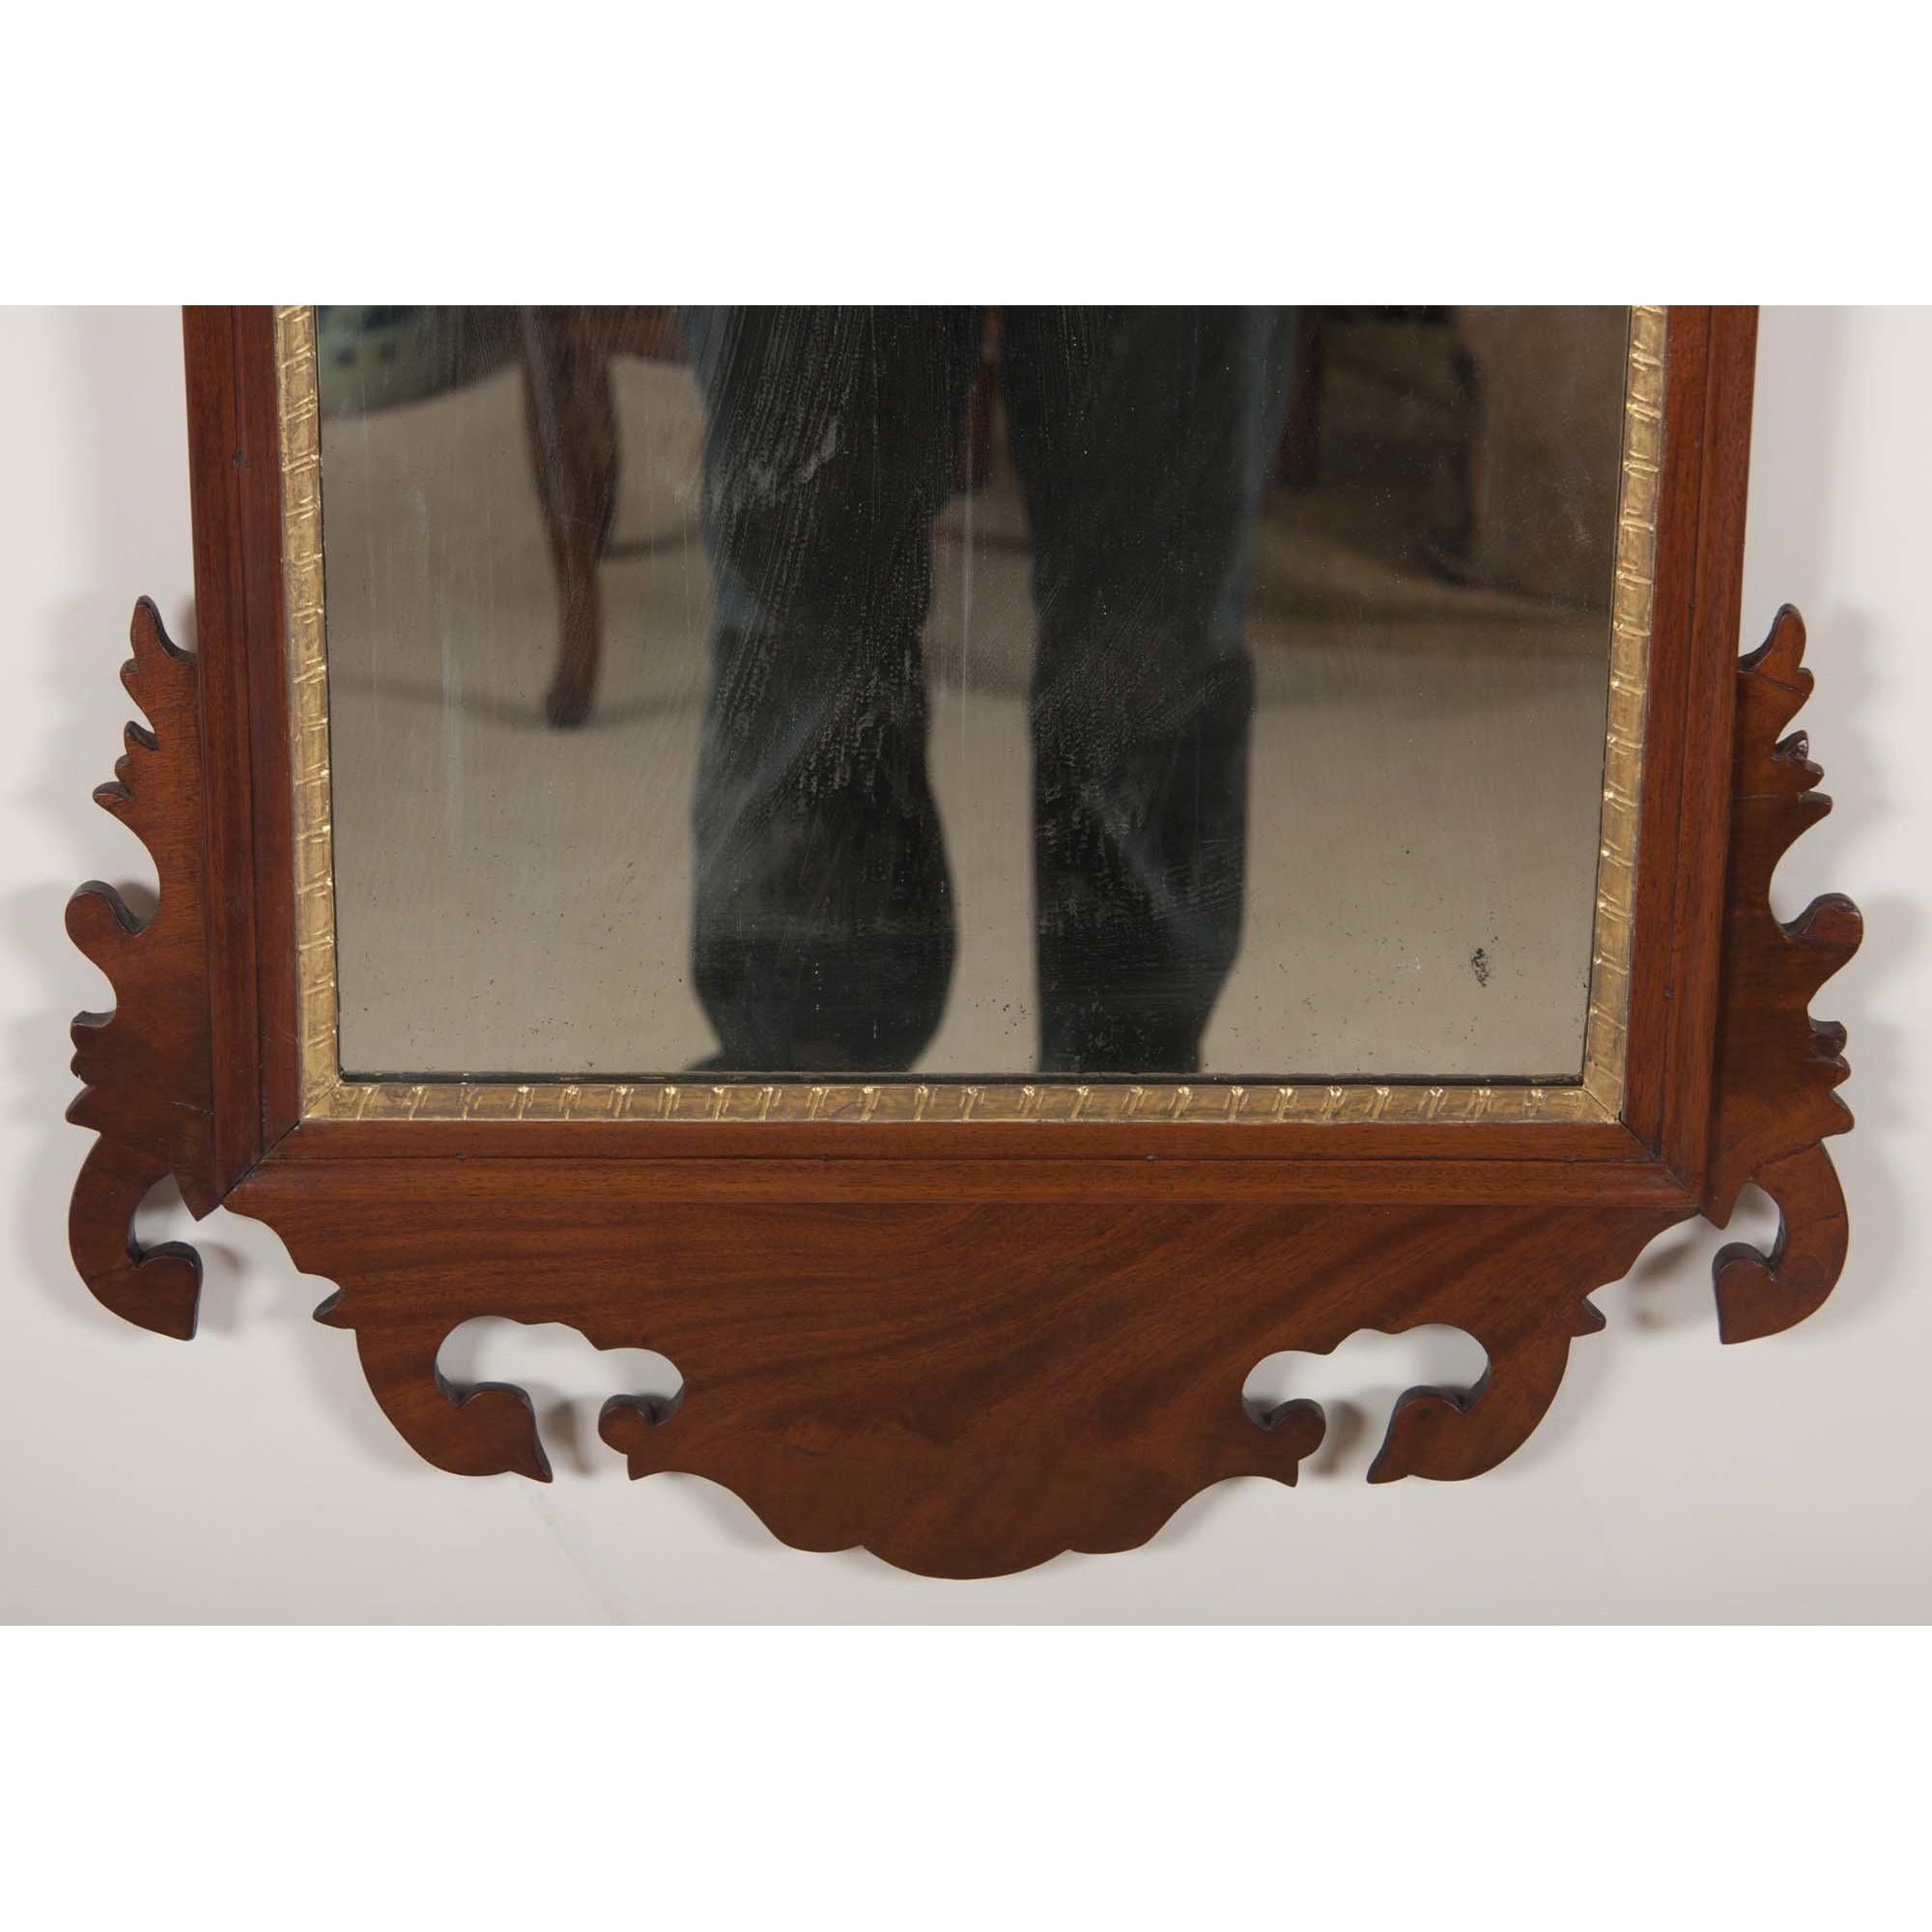 Mahogany Early Queen Anne Pier Mirror with Phoenix Crest